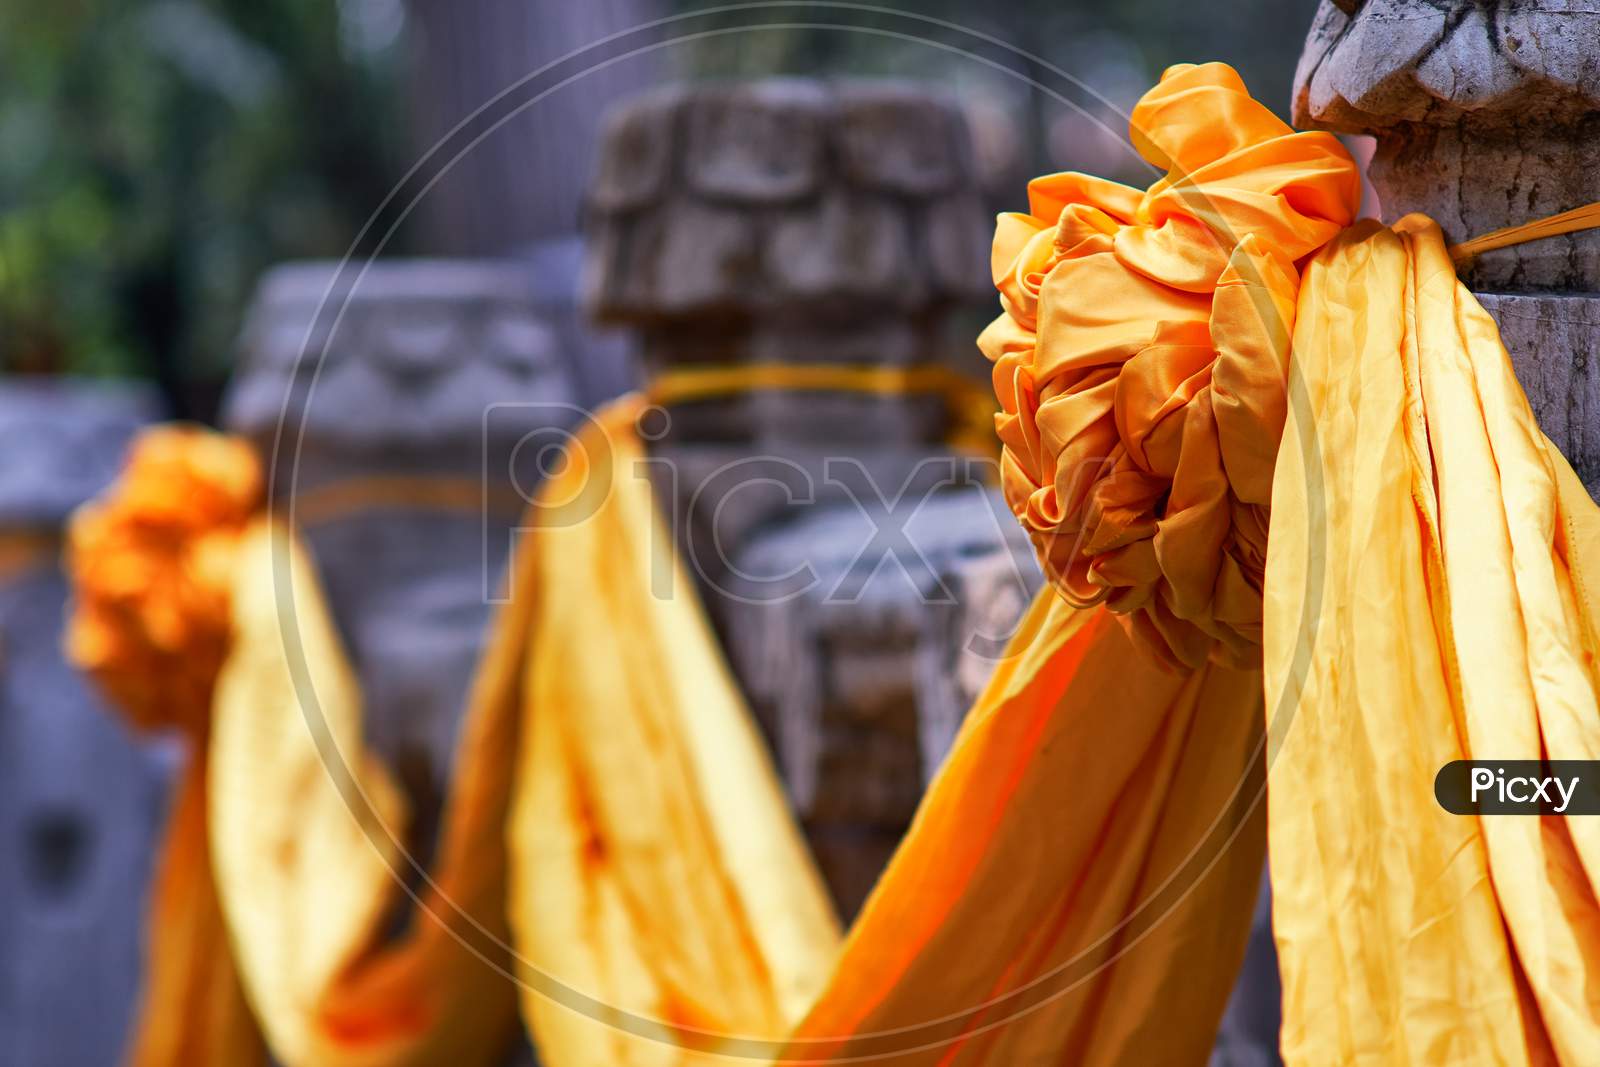 Temple Of Confucius, Unesco World Heritage Site In Qufu, Birthplace Of Confucius. Yellow Silk Scarves Decorating The Marble Pillars, Chinese Culture And Architectural Details